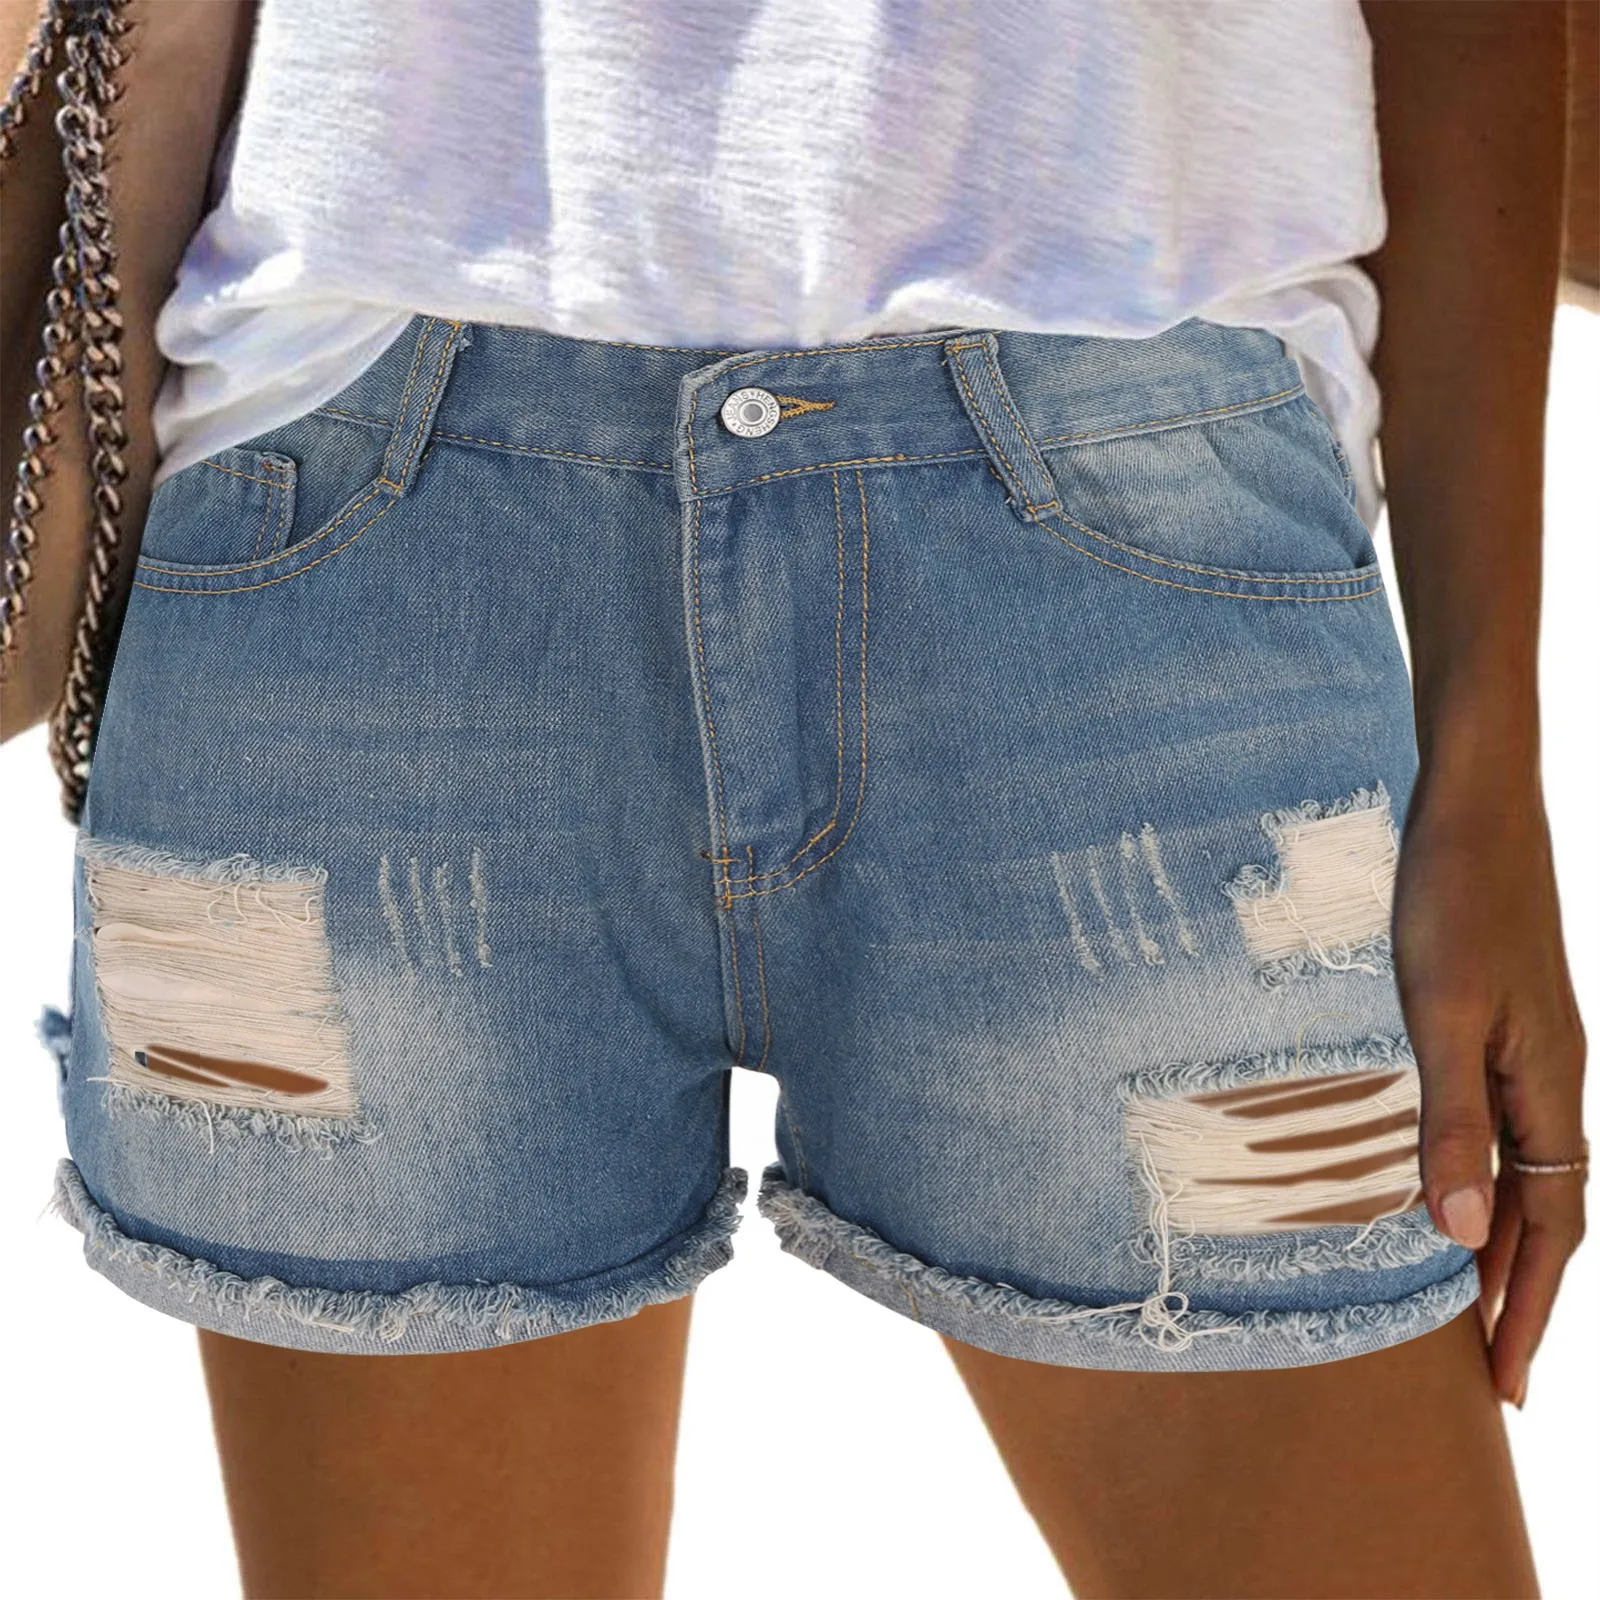 

Women Casual Hole Denim Shorts Pocketed Ripped Mini Hot Jean Short Pants Mujer Spring Summer Baggy Comfy Straight Cortos